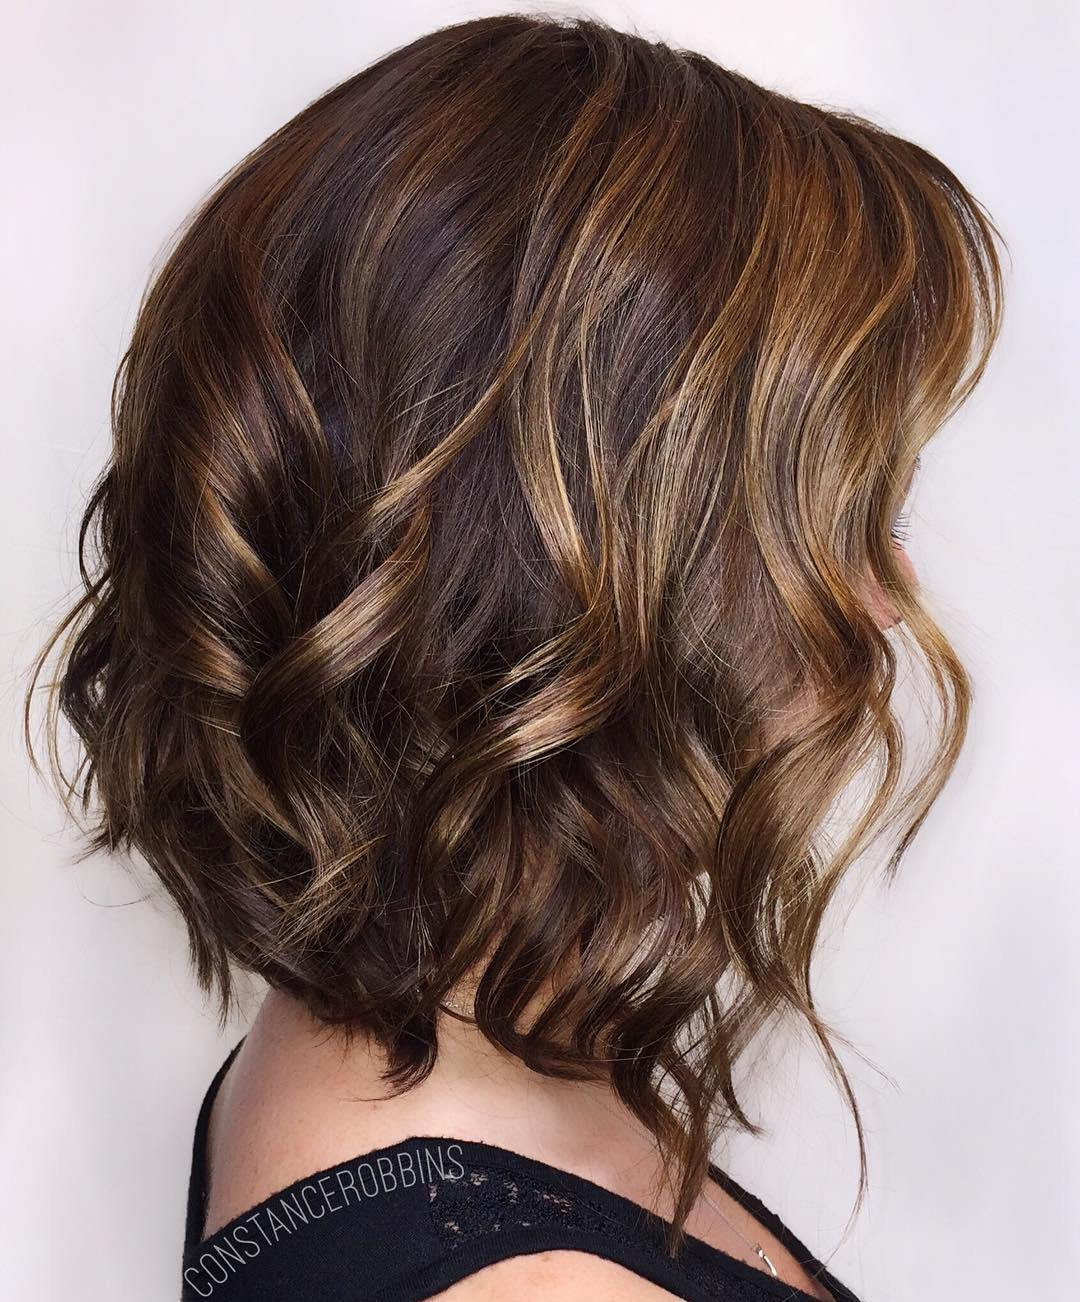 Medium Length Hairstyles With Highlights And Lowlights
 50 Light Brown Hair Color Ideas with Highlights and Lowlights